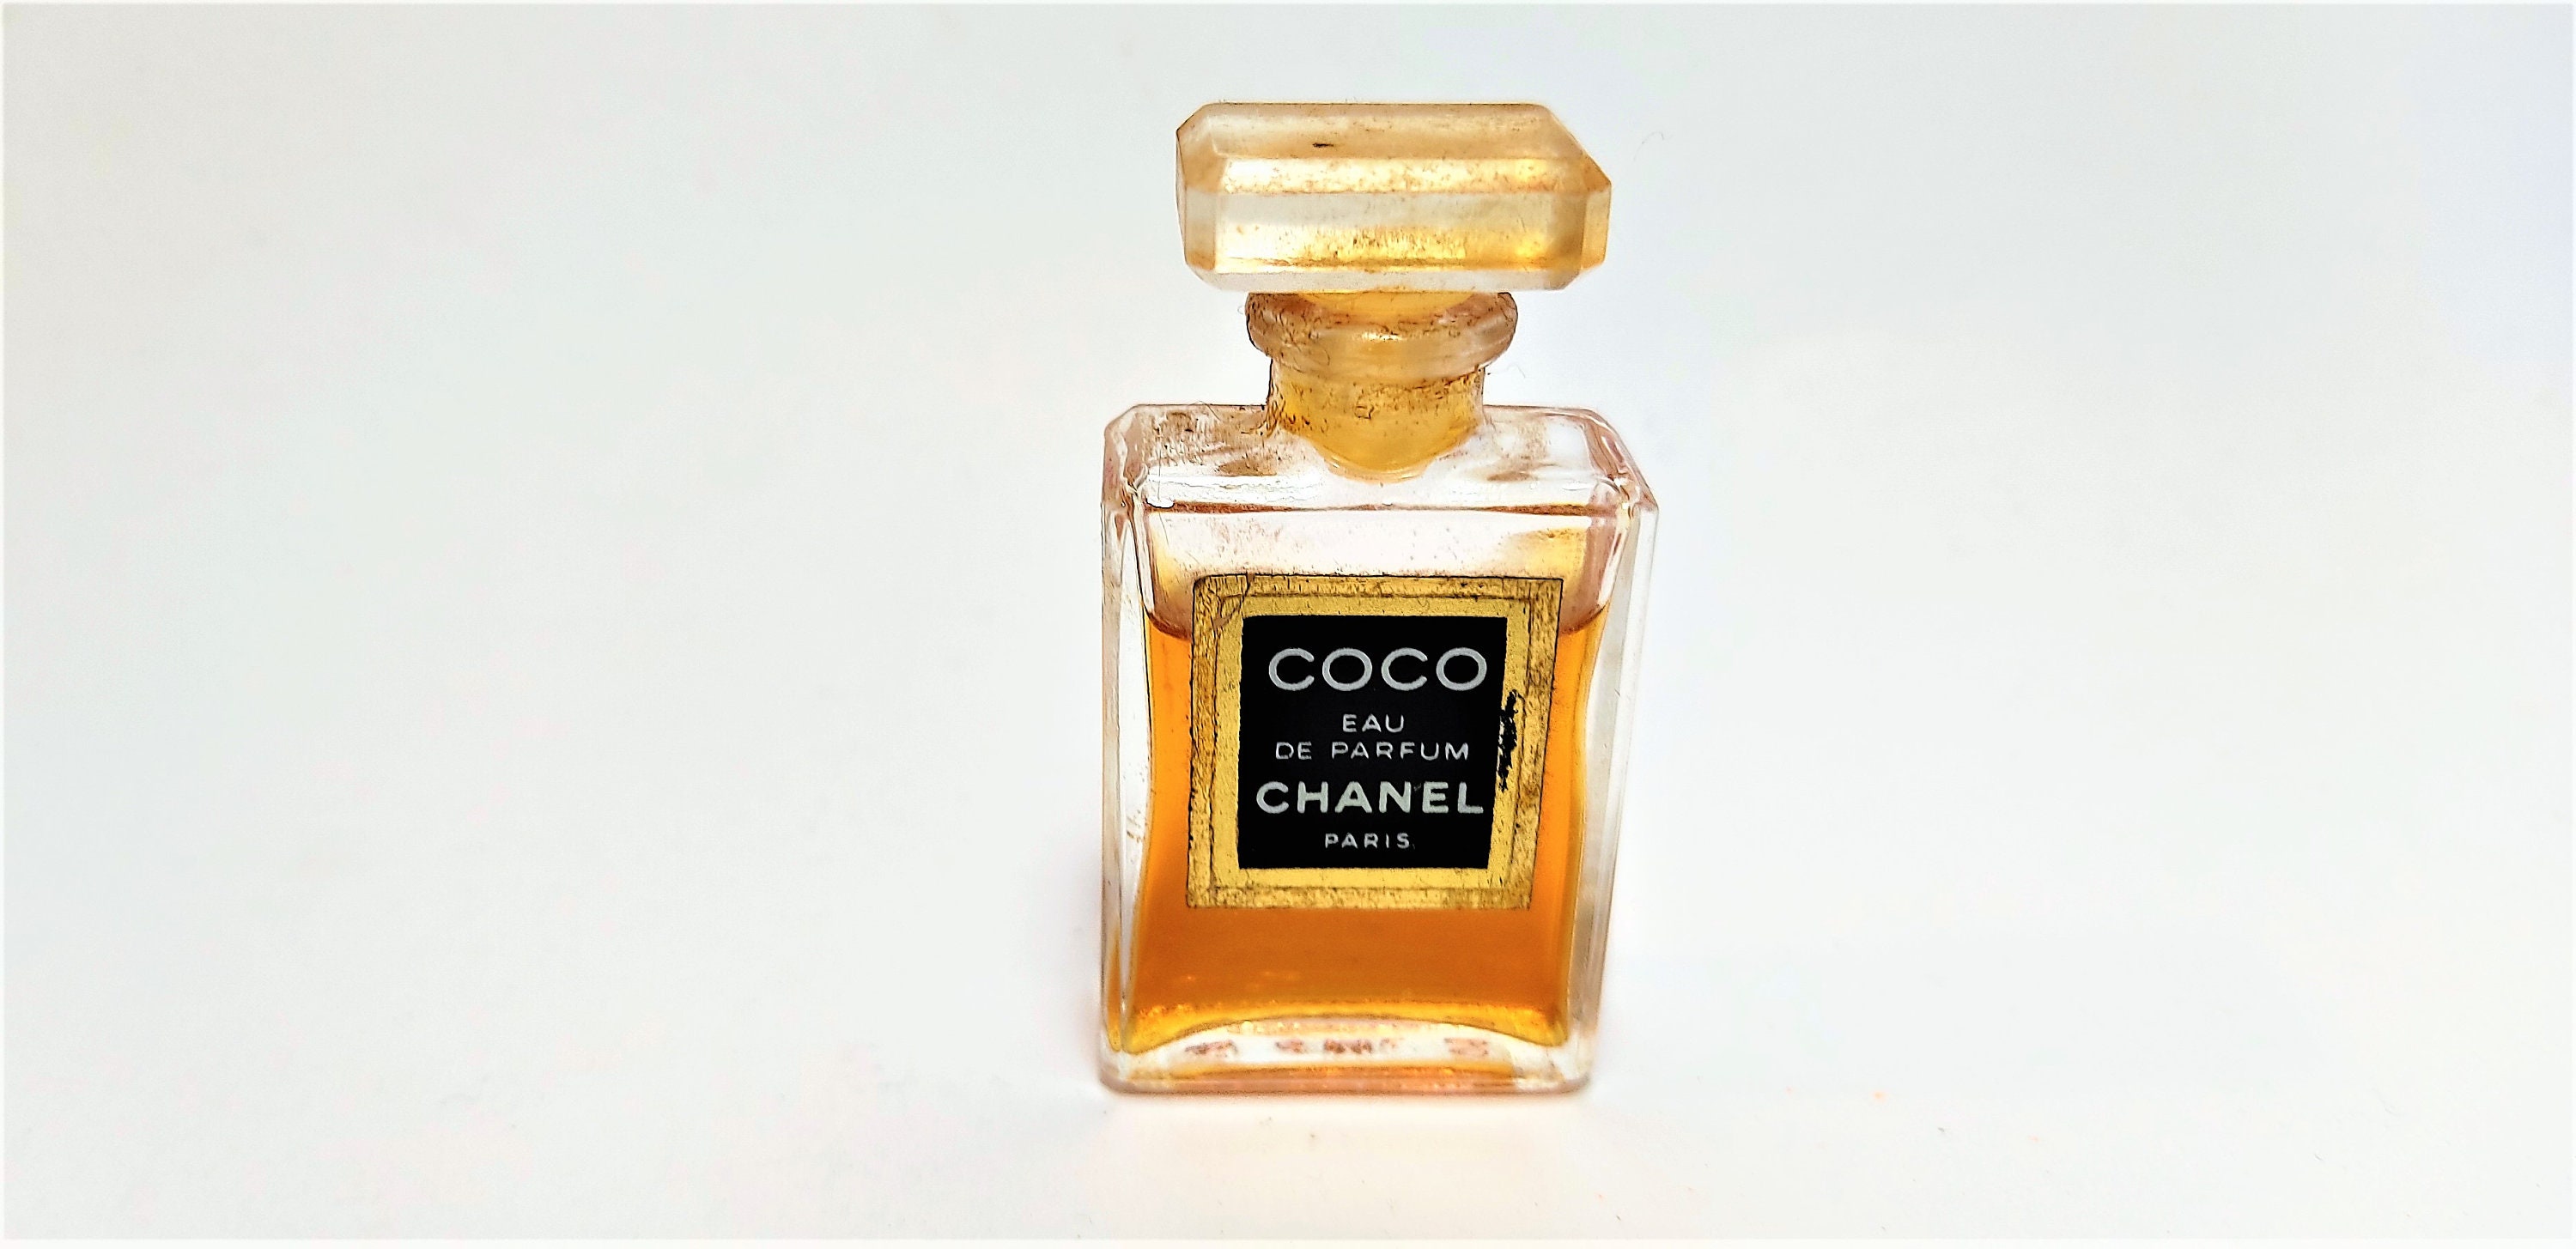 Get the best deals on CHANEL Cristalle Fragrances for Women when you shop  the largest online selection at . Free shipping on many items, Browse your favorite brands